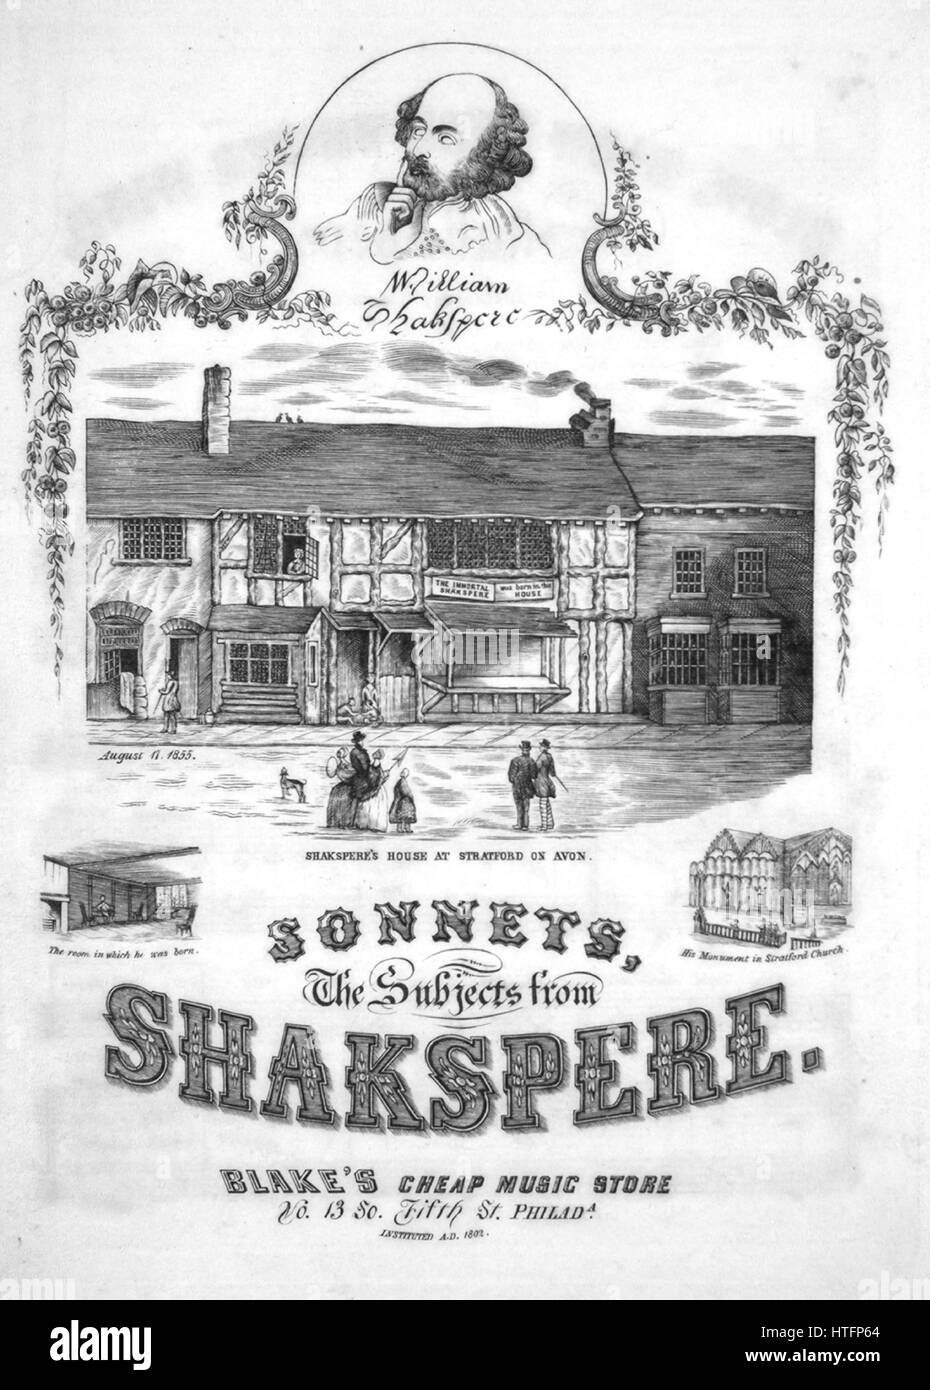 Sheet music cover image of the song 'Sonnets, the Subjects from Shakspere [sic]', with original authorship notes reading 'The Words by [William] Shakspere [sic] Music by Dr Arne', 1855. The publisher is listed as 'Blake's Cheap Music Store, No.13 So. Fifth St.', the form of composition is 'strophic with chorus', the instrumentation is 'piano and voice', the first line reads 'Blow, blow, thou winter wind, Thou art not so unkind as man's ingratitude', and the illustration artist is listed as 'unattributed lith. of 'Shakspere's [sic] House at Stratford on Avon, The room in which he was born, and Stock Photo